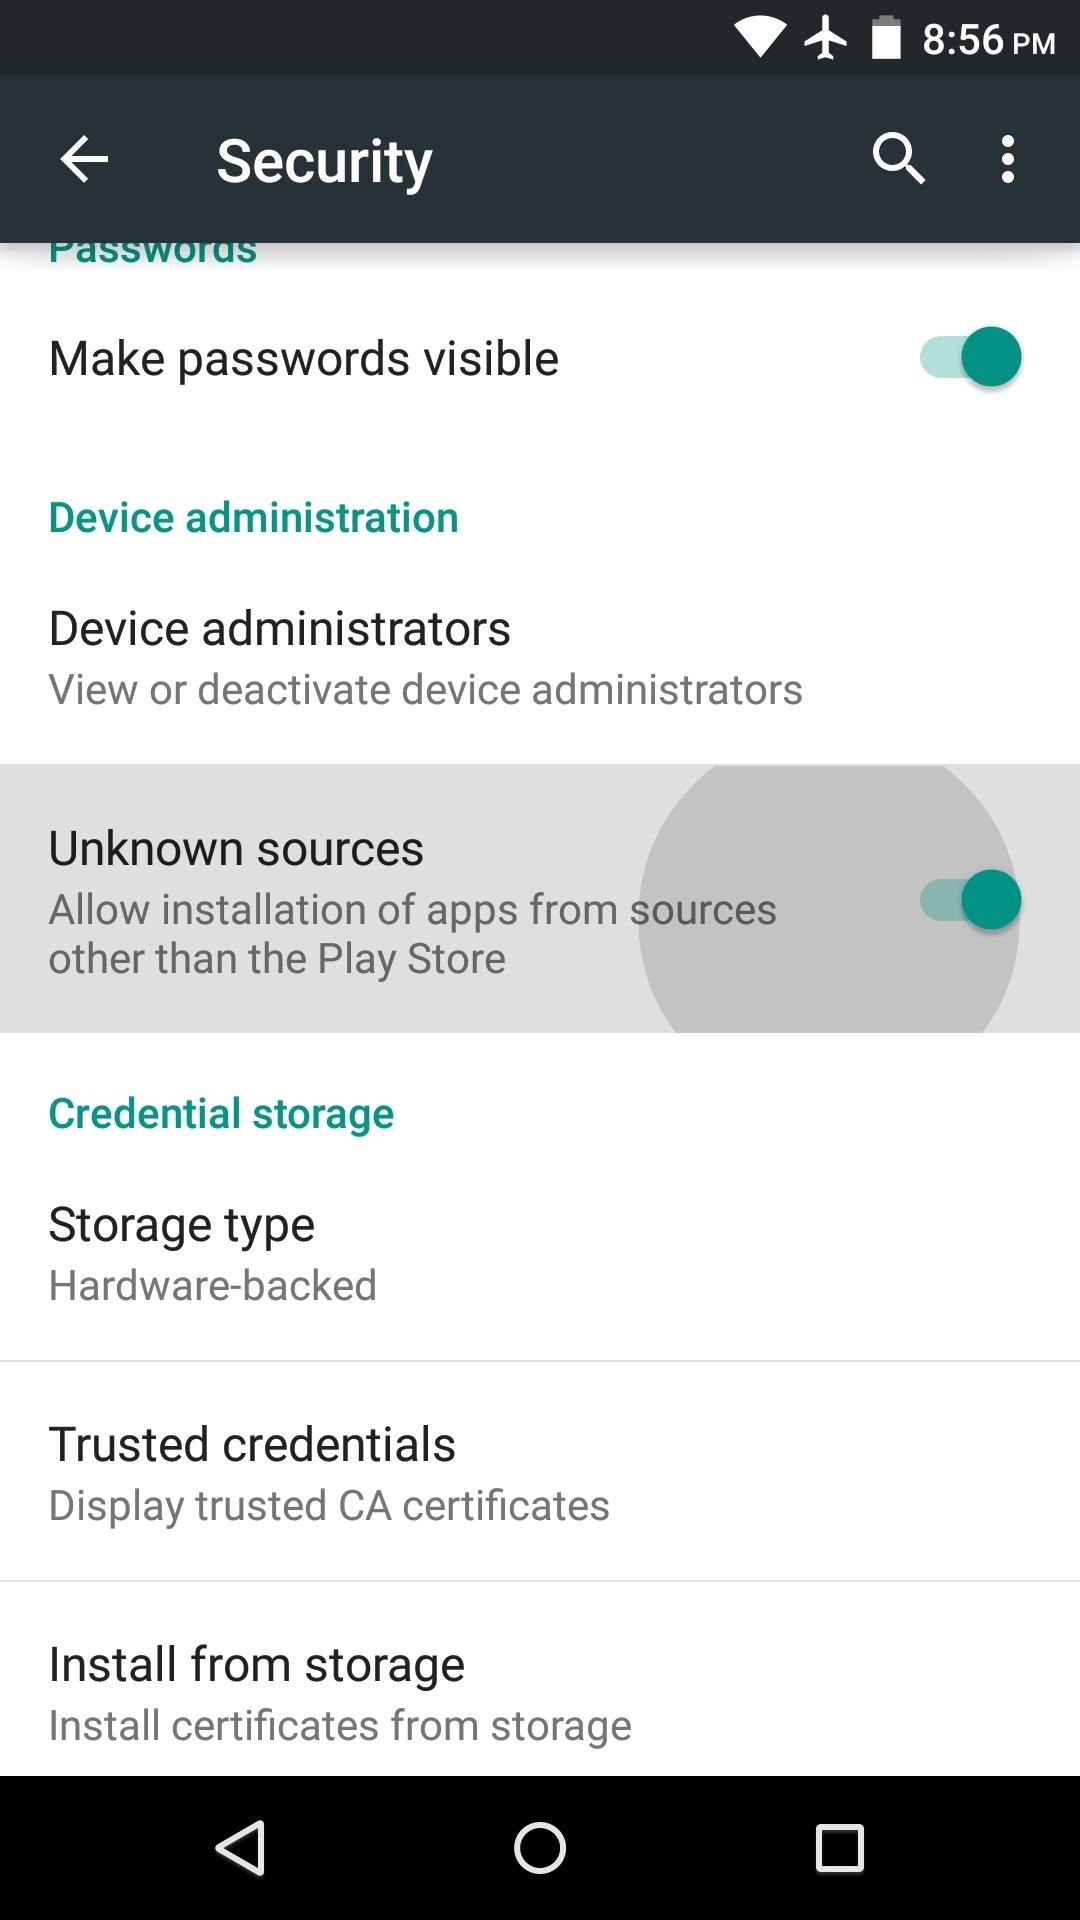 Go to Apps and allow "installation from unknown sources"